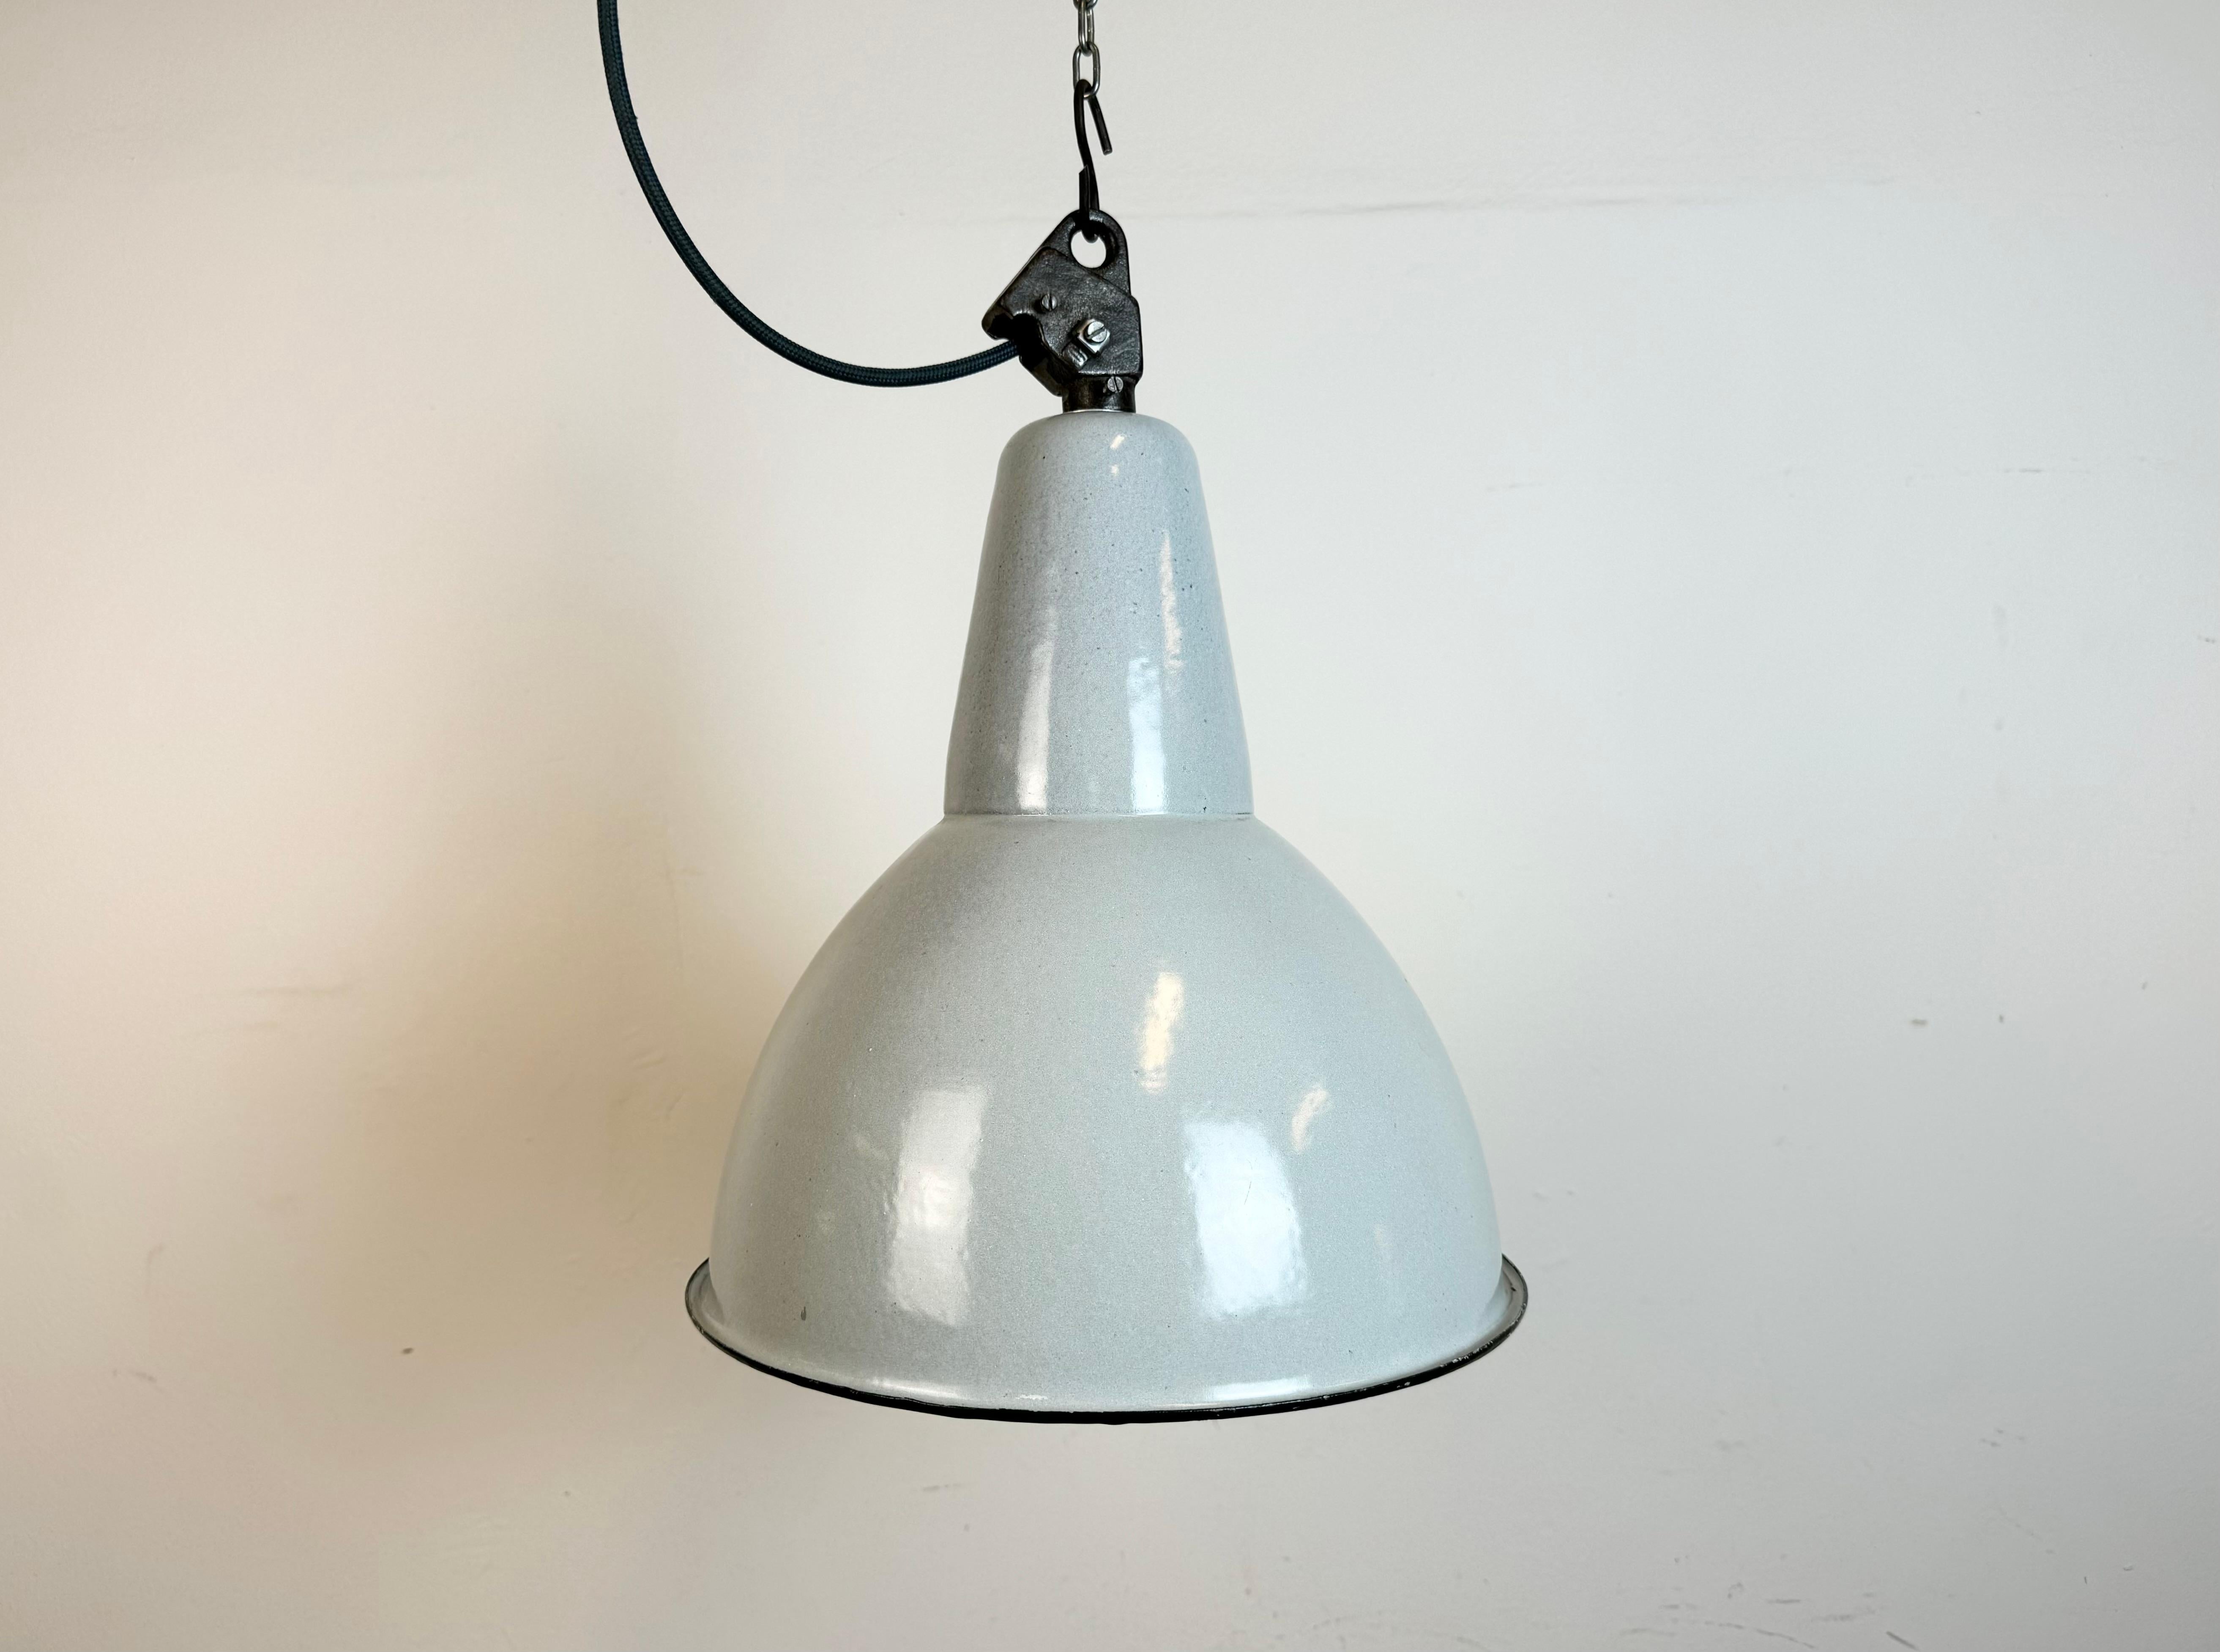 Industrial grey enamel pendant light made by A23 factory in Wilkasy in Poland during the 1960s. White enamel inside the shade. Cast iron top. The porcelain socket requires standard E 27/ E26 light bulbs. New wire. Fully functional. The weight of the